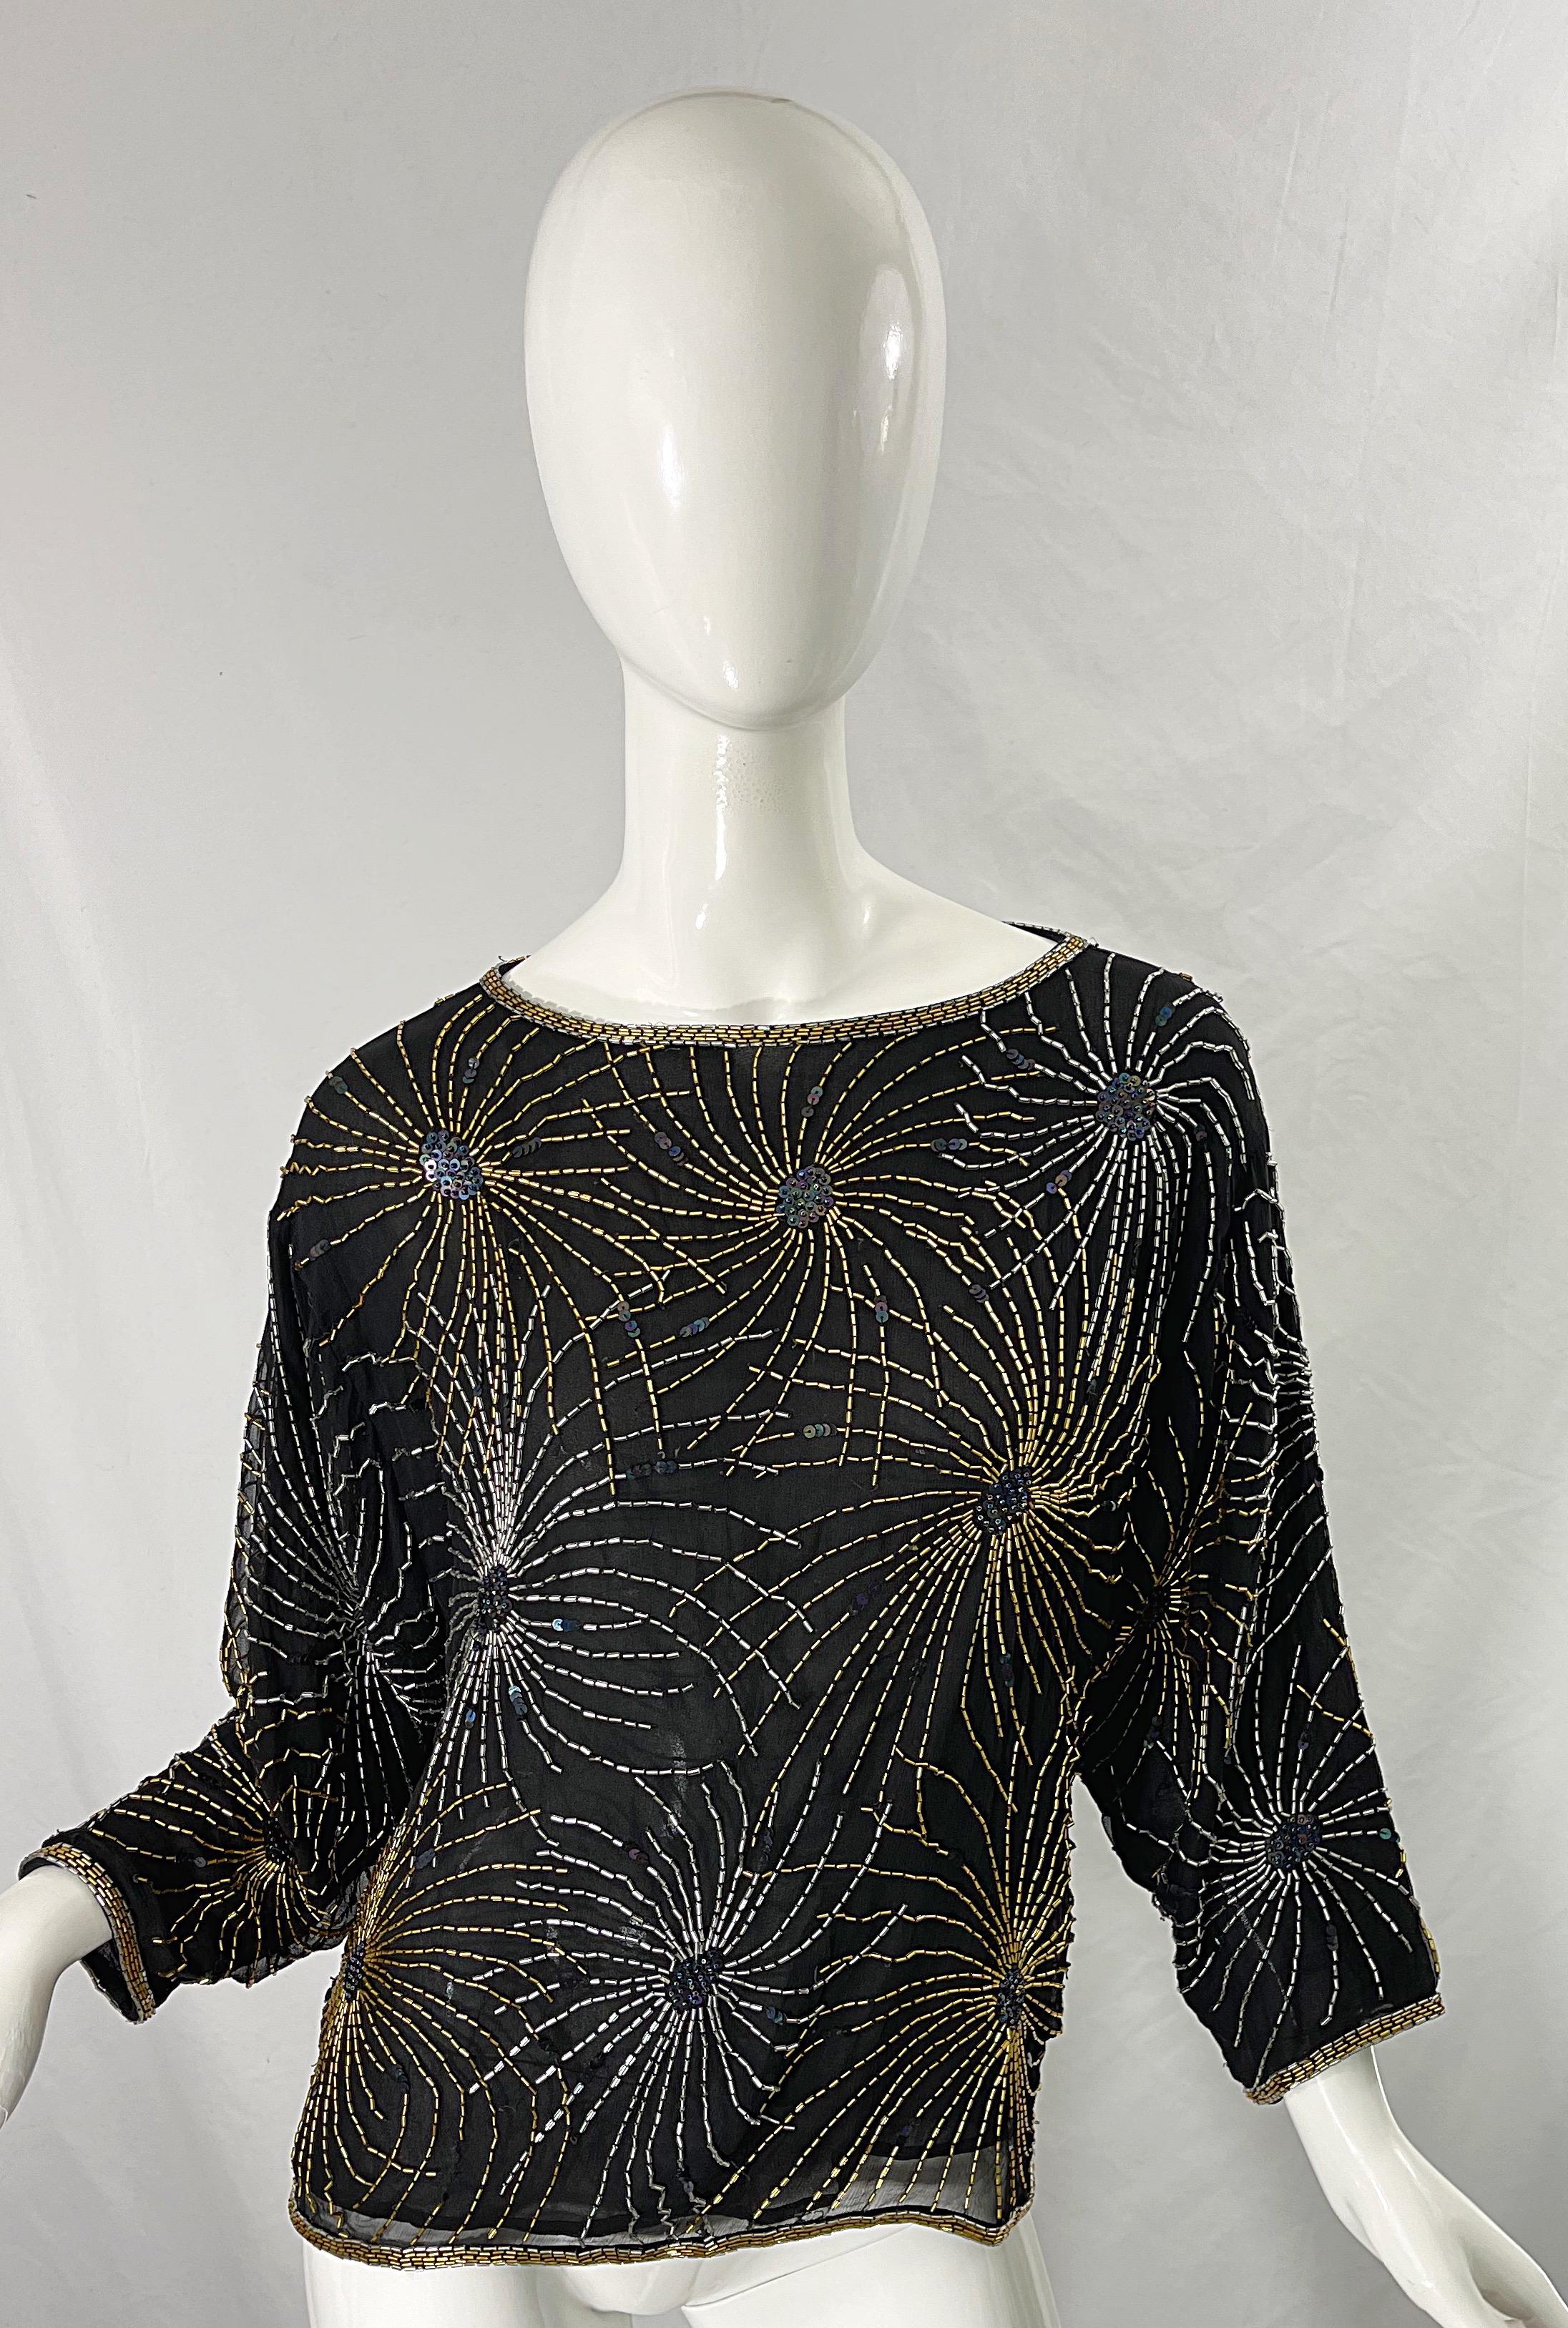 Halston 1970s Iconic Fireworks Beaded Black Silk Chiffon Vintage 70s Blouse Top For Sale 11